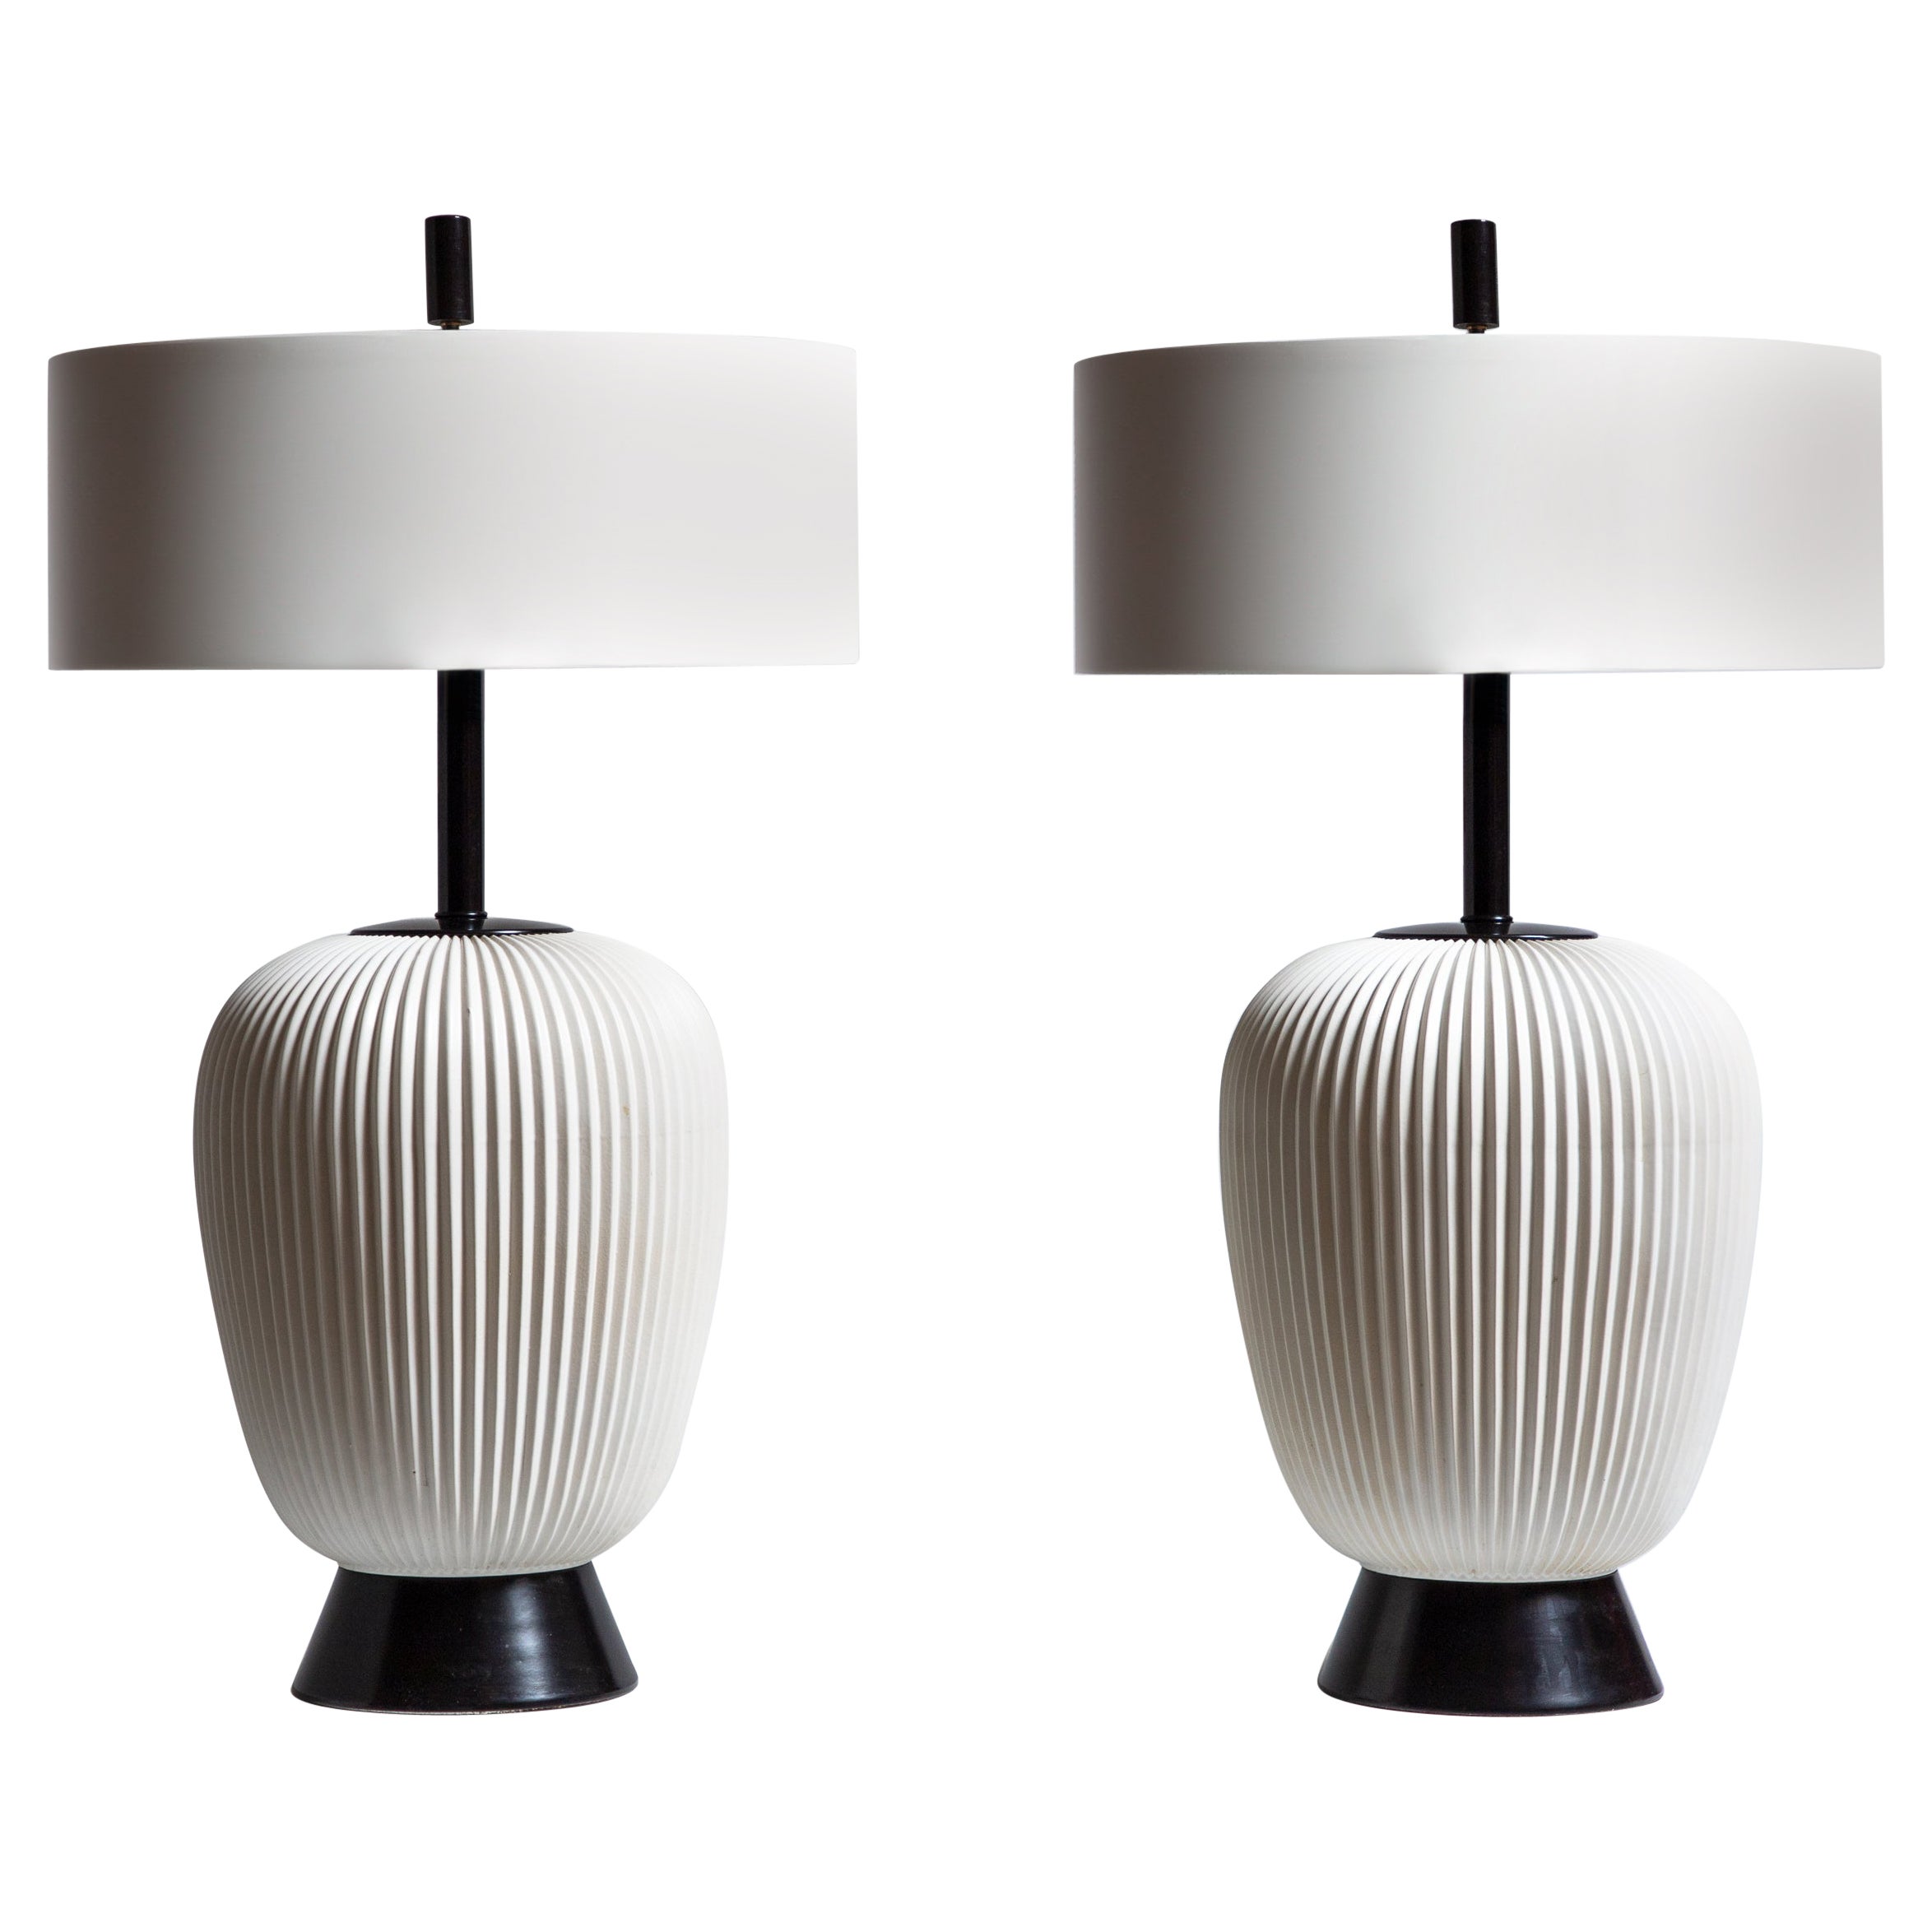 Gerald Thurston Ribbed Ceramic Table Lamps